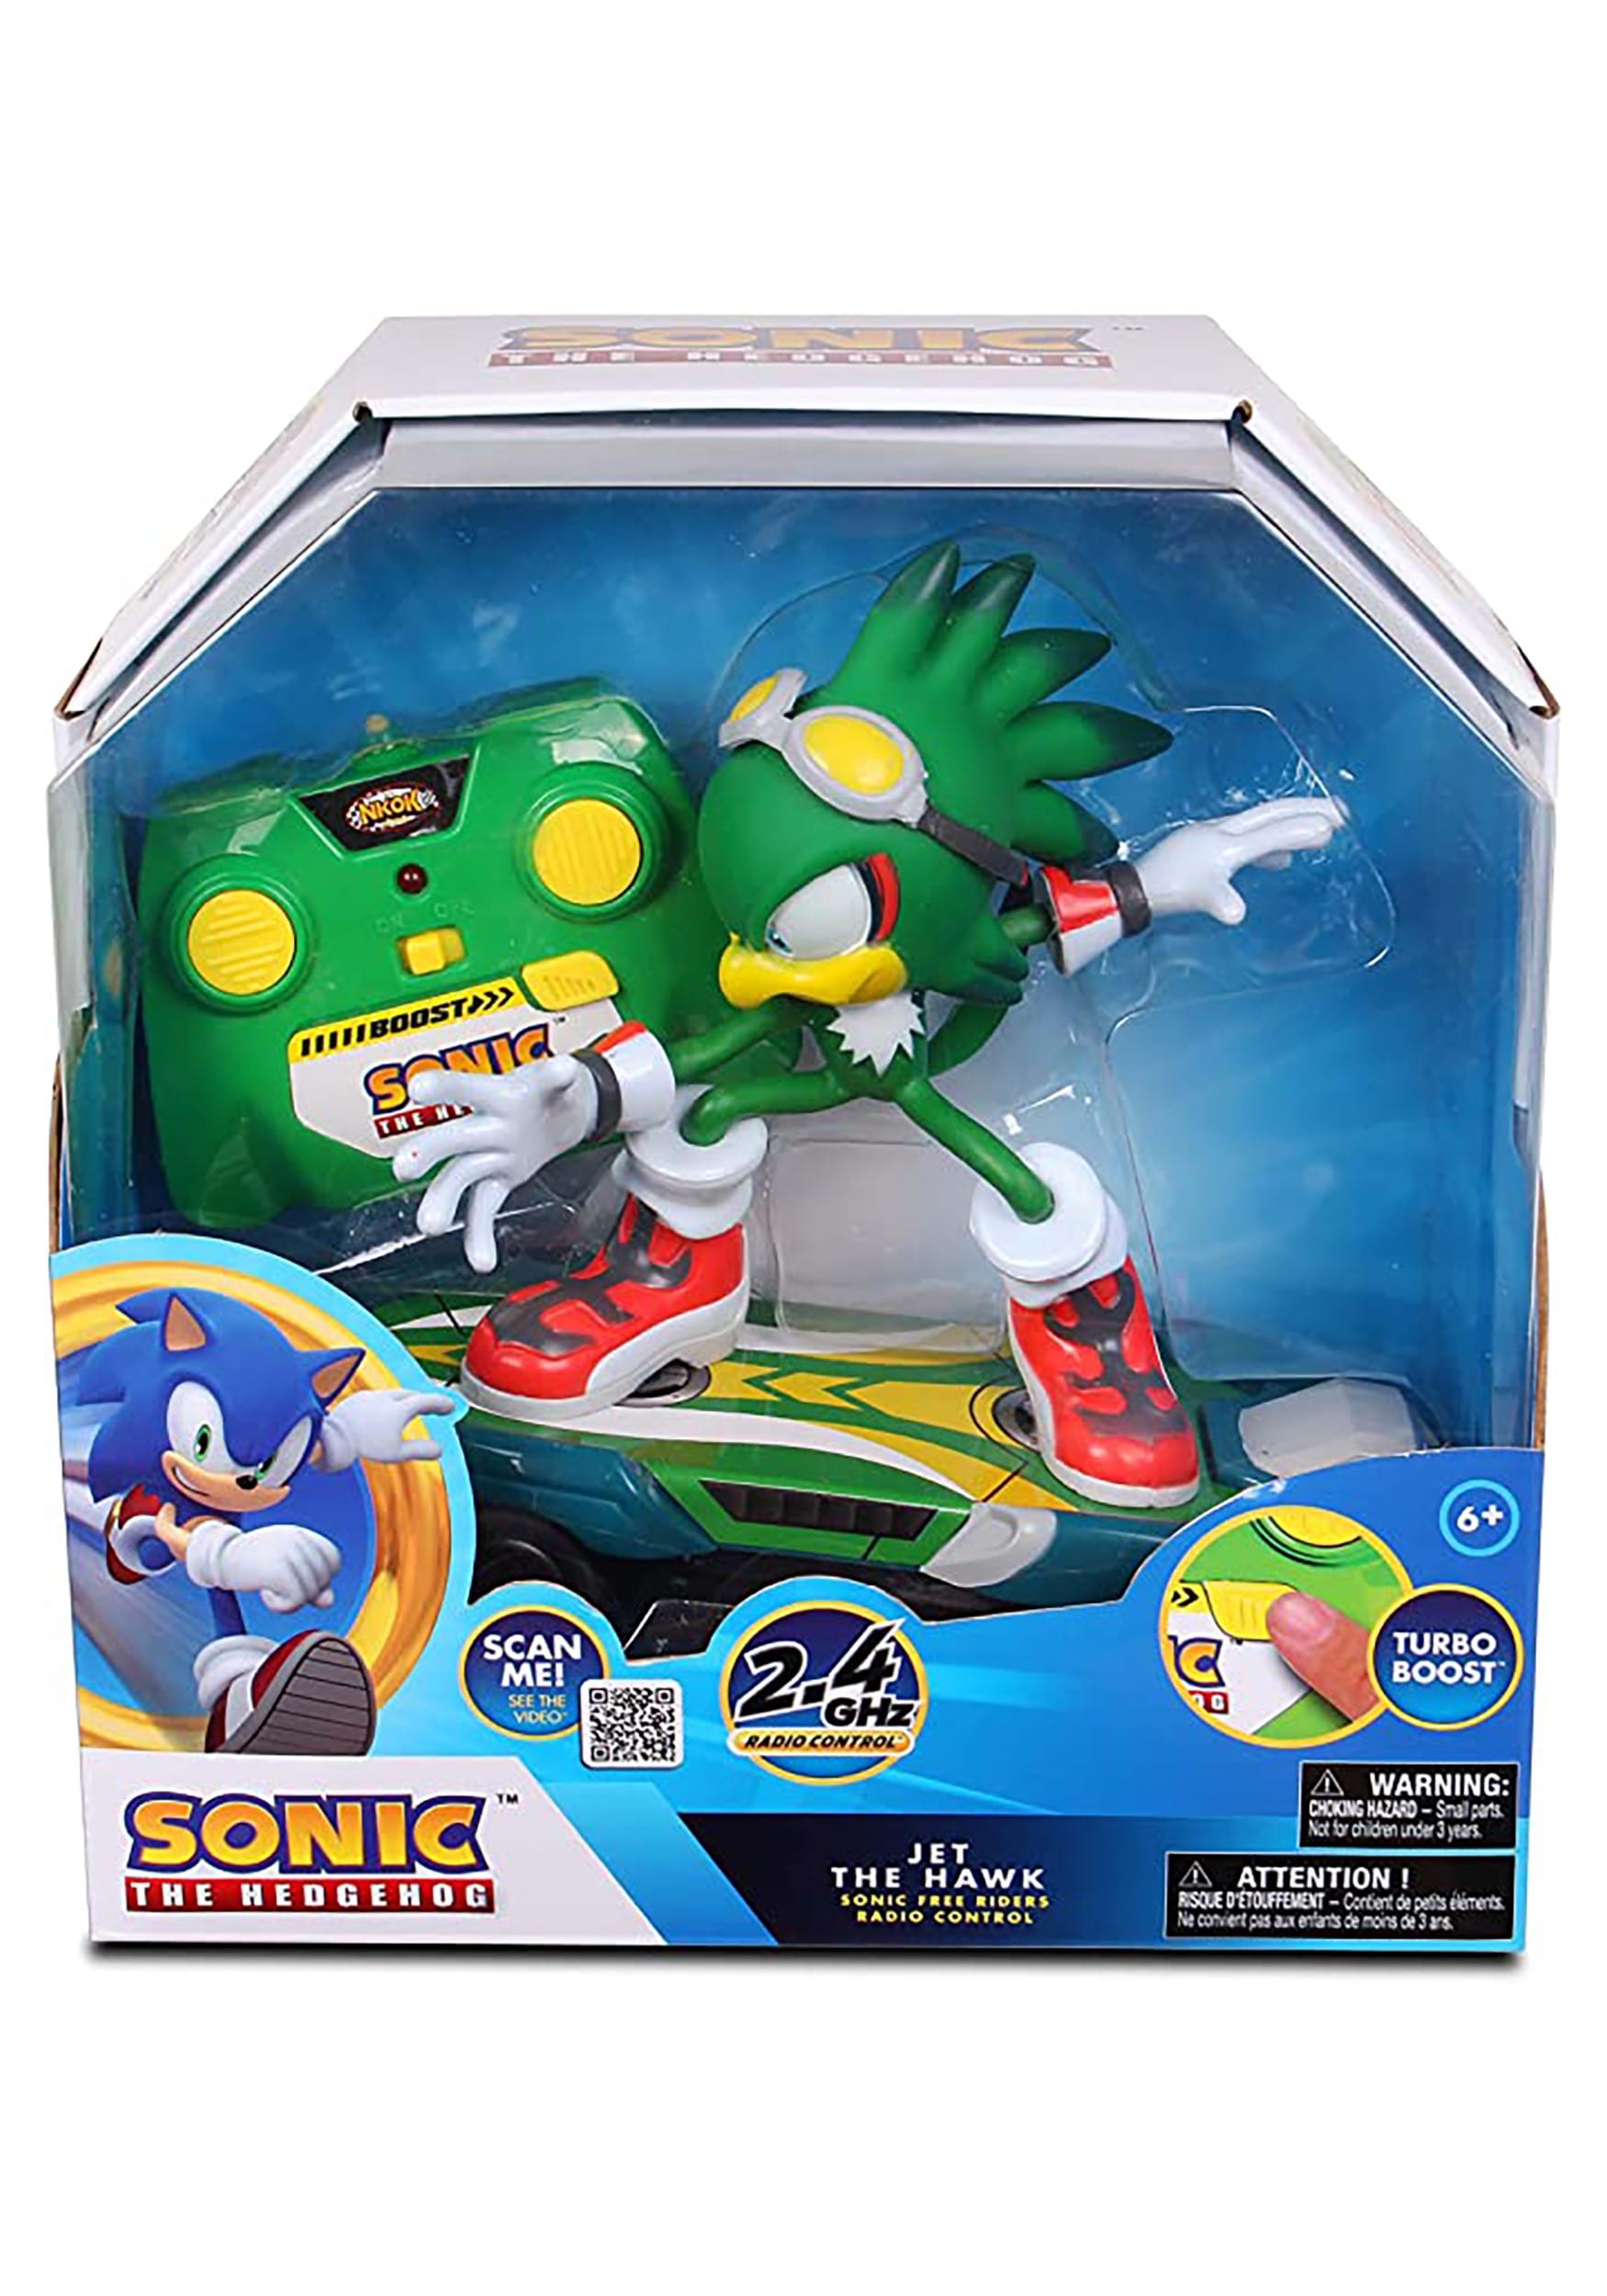 Sonic Jet R/C Skateboard with Turbo Boost